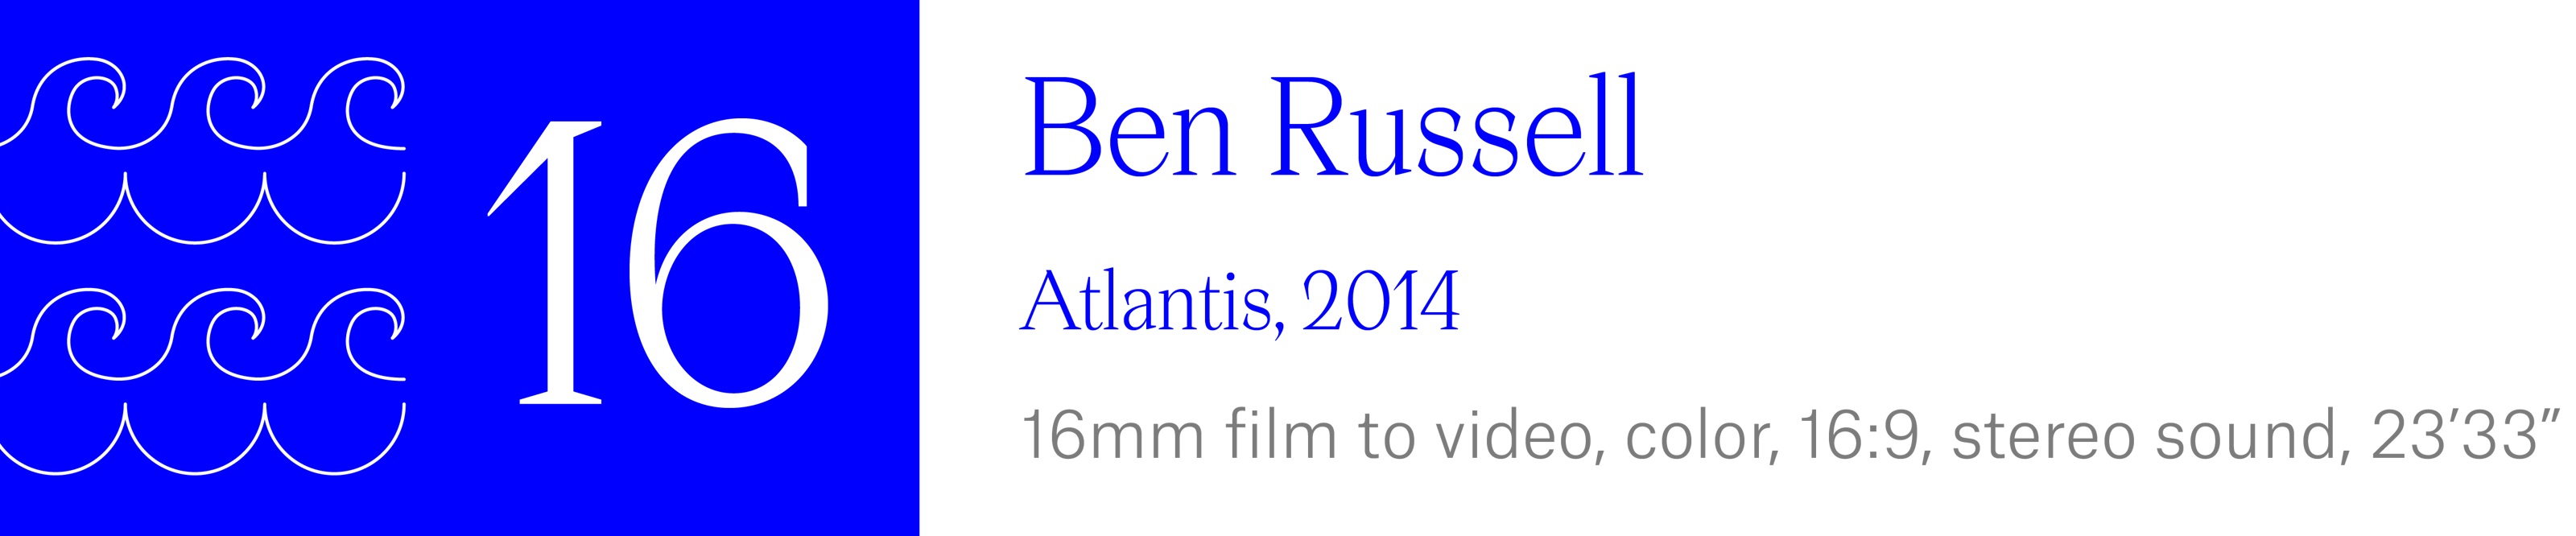 The Wave (16) - Ben Russell. Atlantis, 2014. 16mm film to video, color, 16:9 aspect ratio, stereo sound, 23 minutes, 33 seconds.